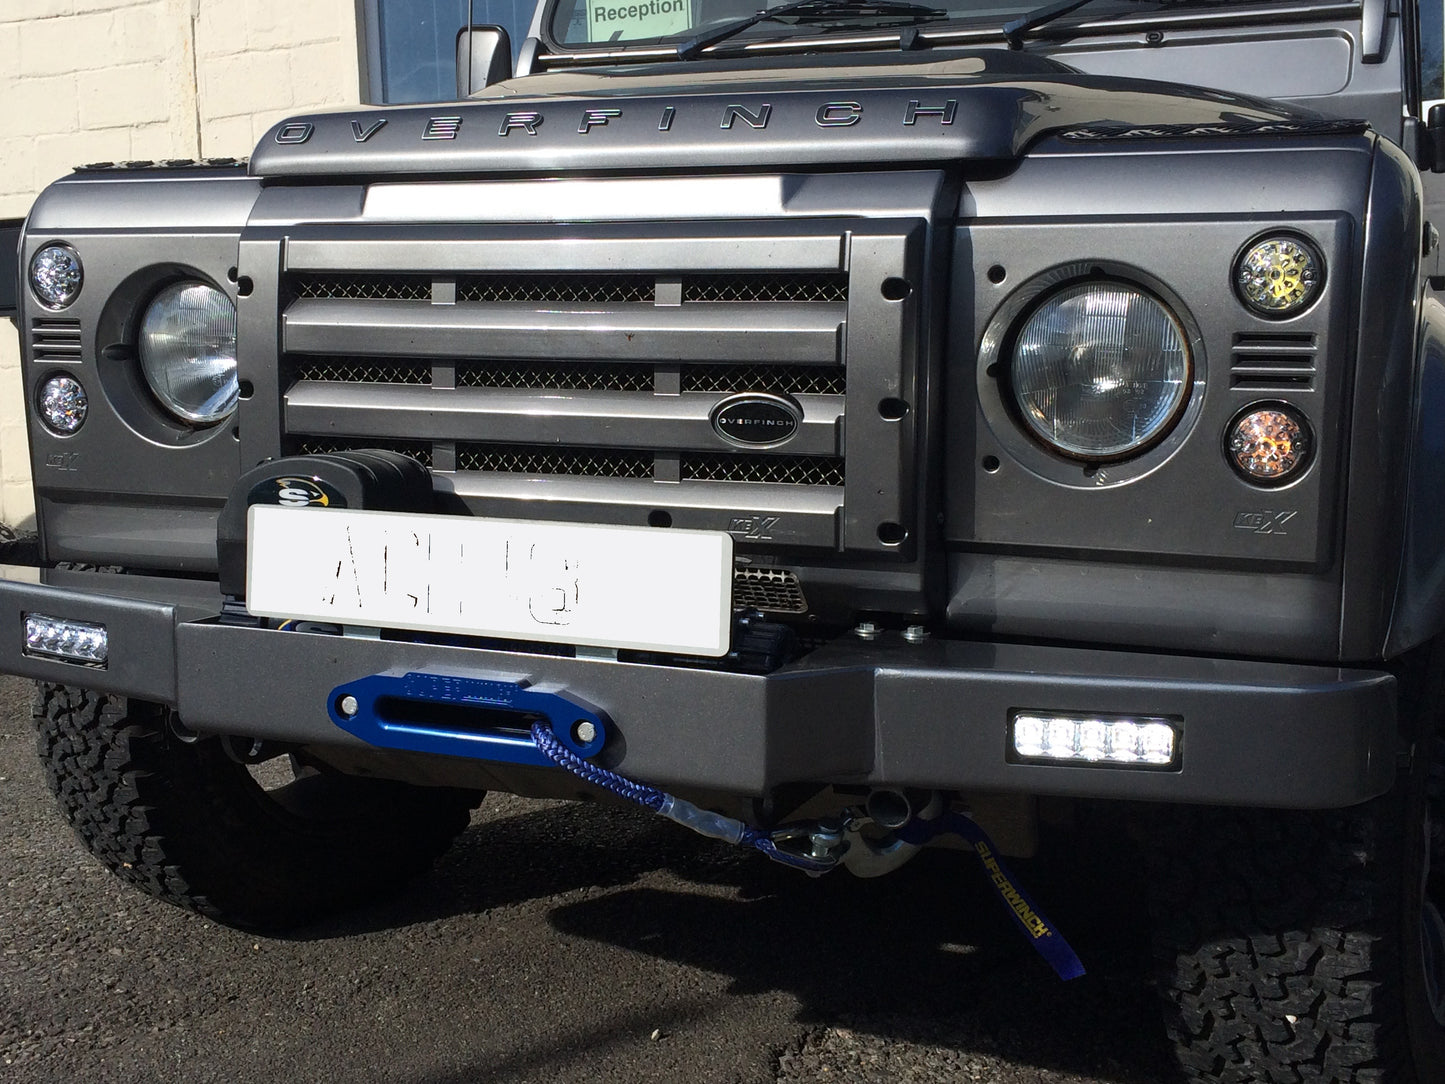 SOLD Land Rover Defender 90 OVERFINCH Bespoke project.